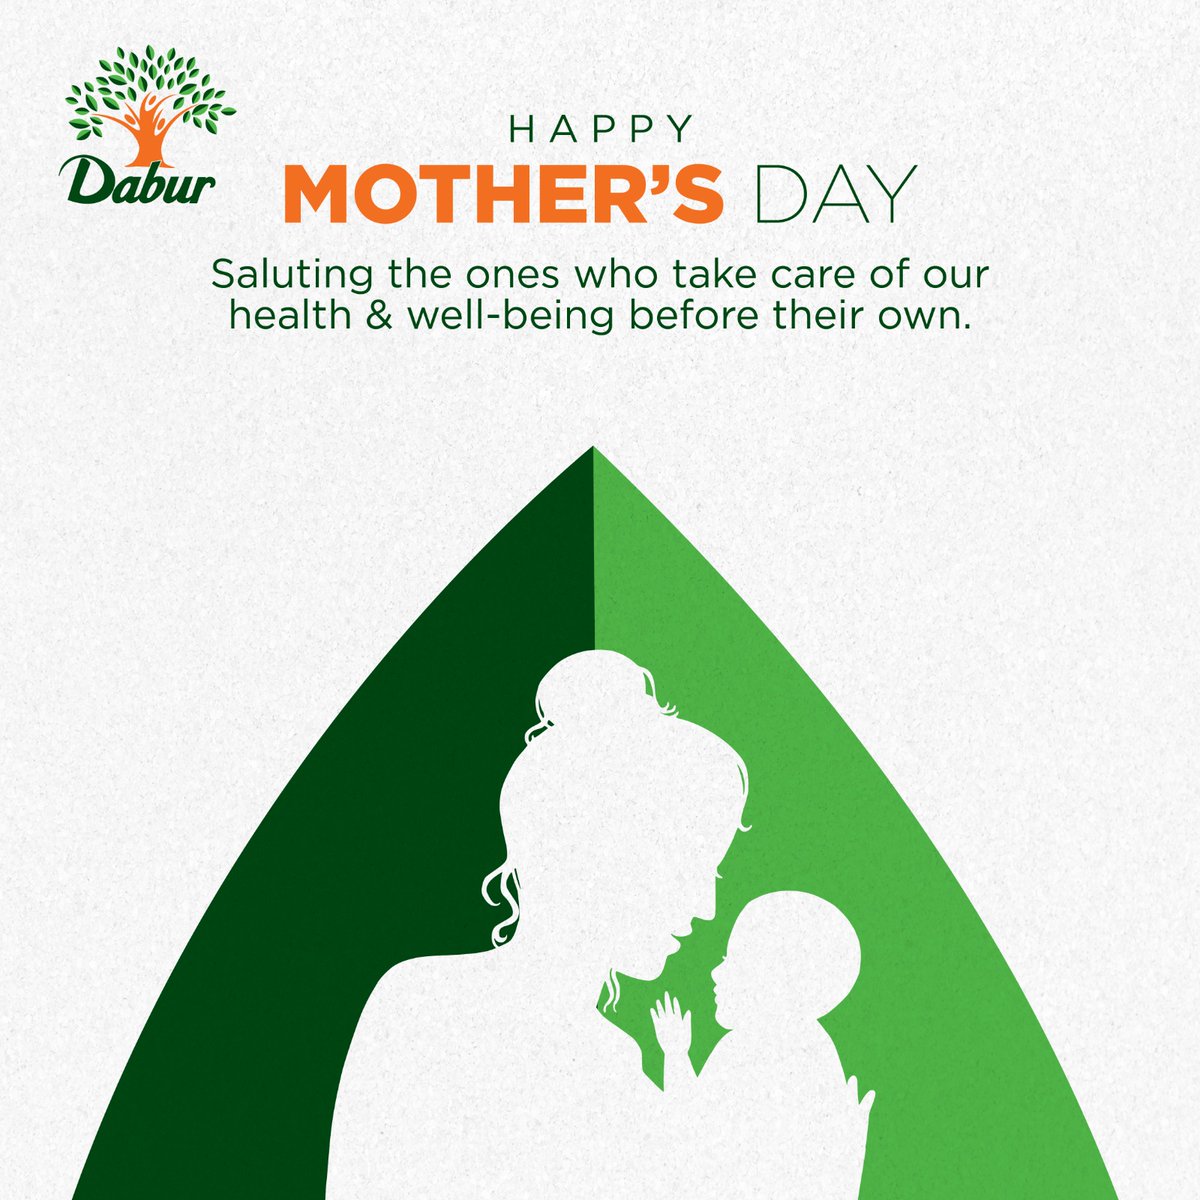 To all the mothers out there... You're the support system we all lean on. You are our source of strength, our rock, our inspiration. We salute your tireless devotion to your family and their well-being. Happy Mother's Day! #MothersDay #ScienceOfAyurveda #daburindia #family